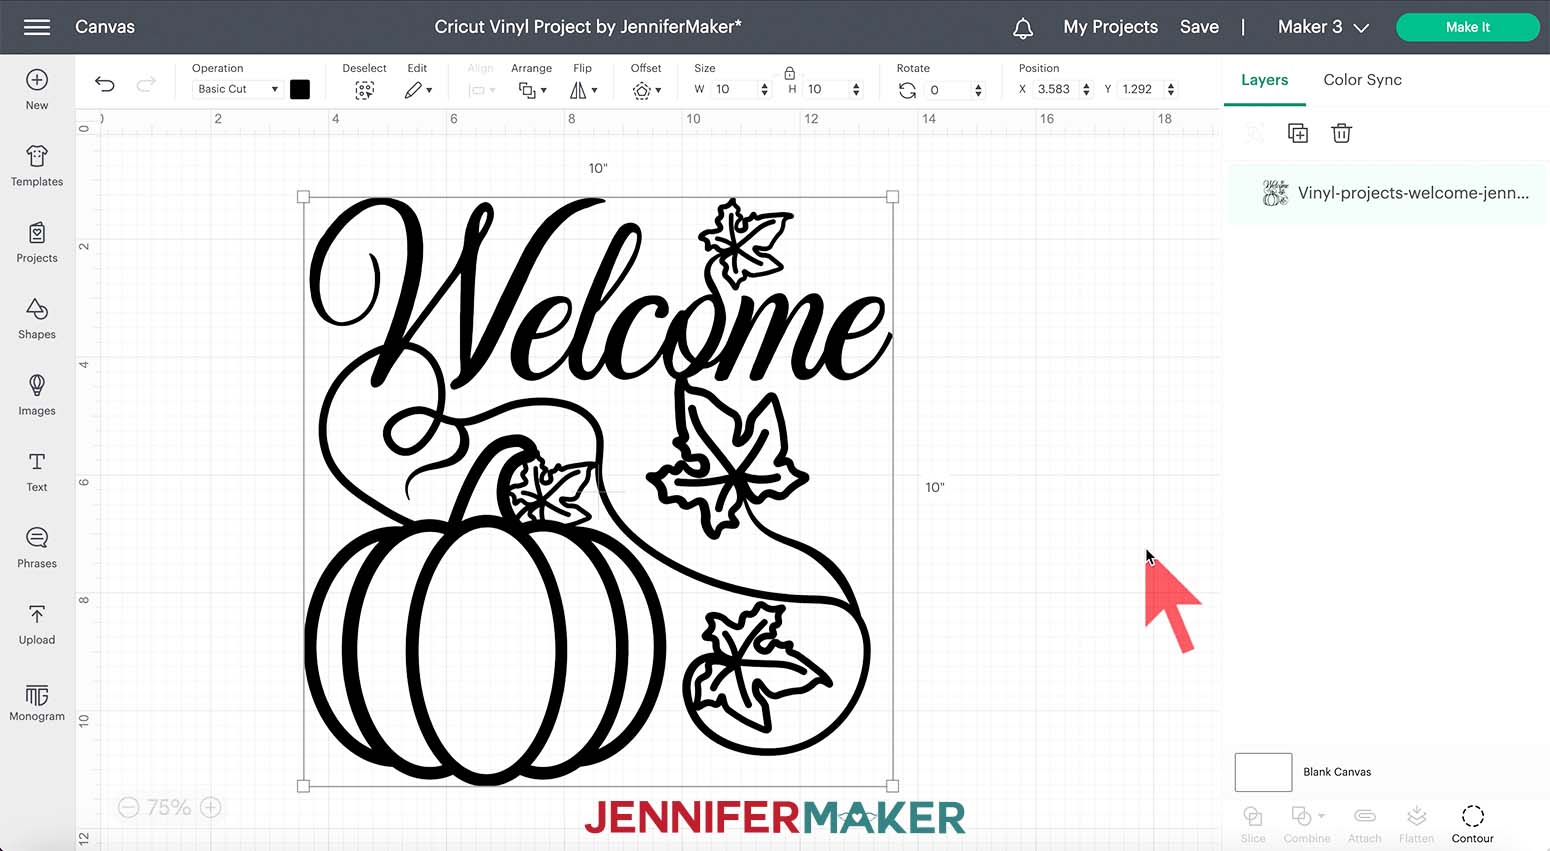 Screenshot of Cricut Design Space Canvas showing the size of the welcome image at ten inches by ten inches.